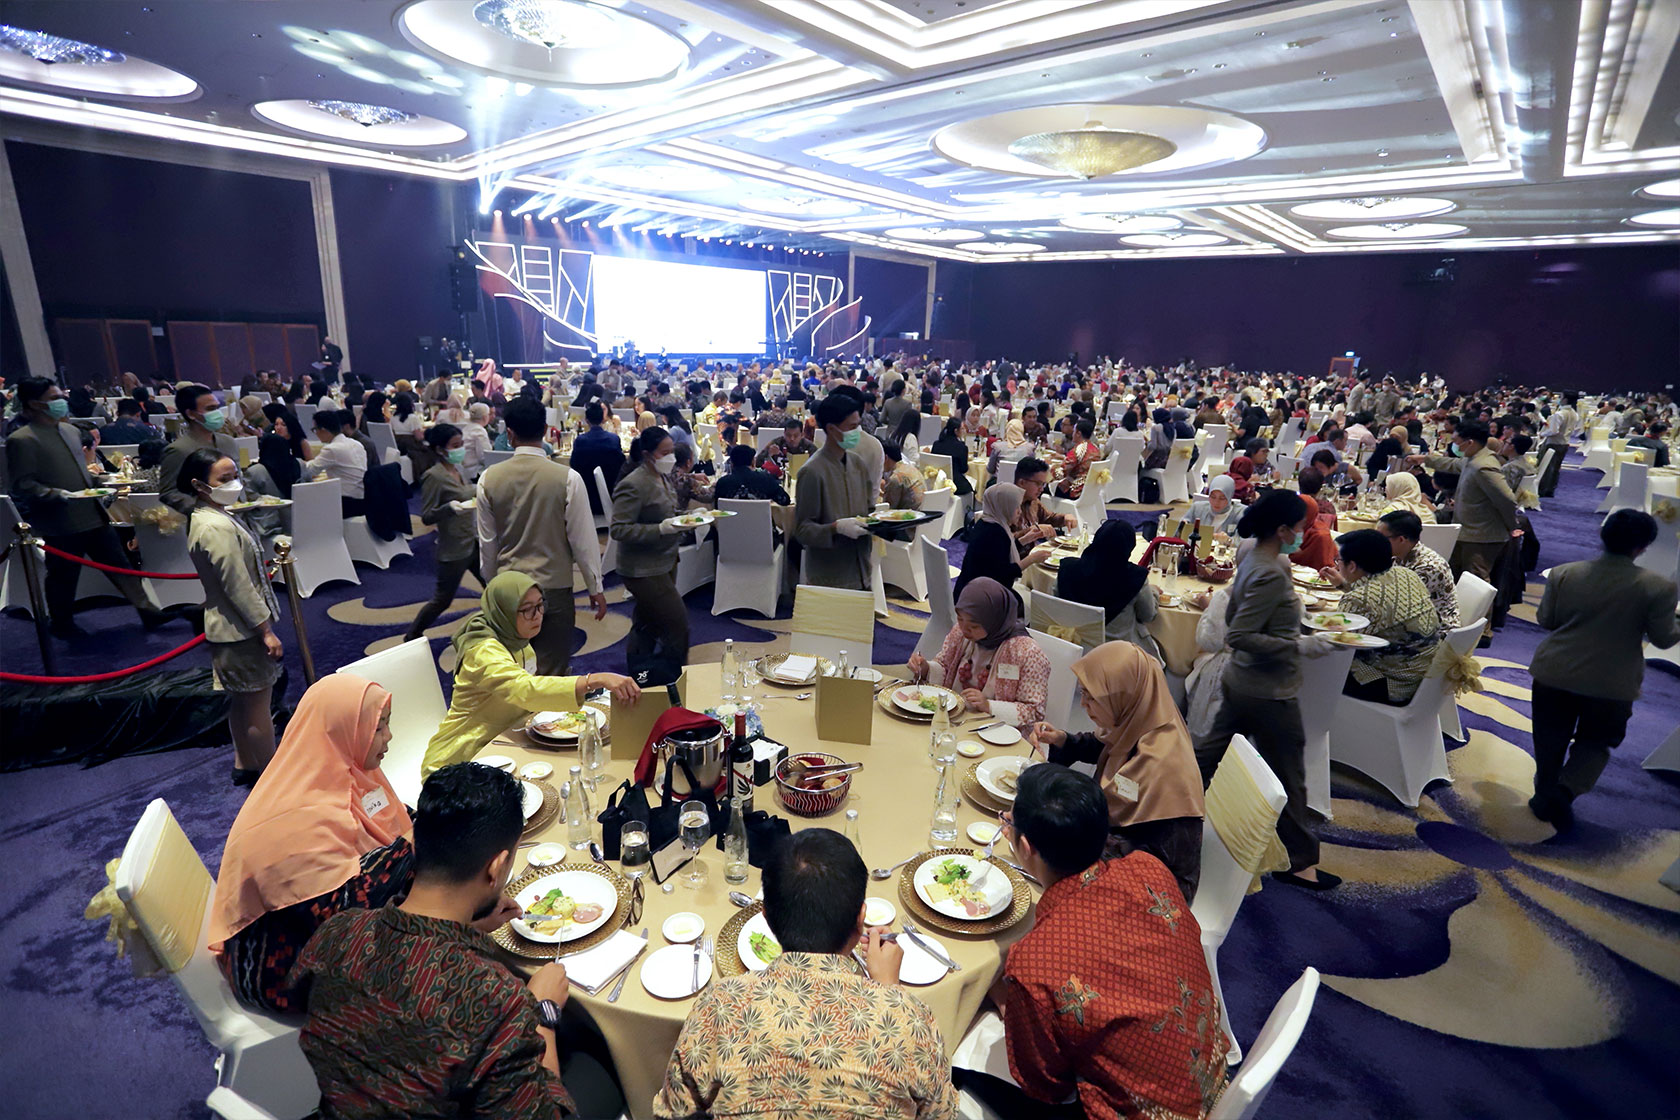 Radiating elegance: The Gala Dinner in Jakarta flourishes with a vibrant ambience.